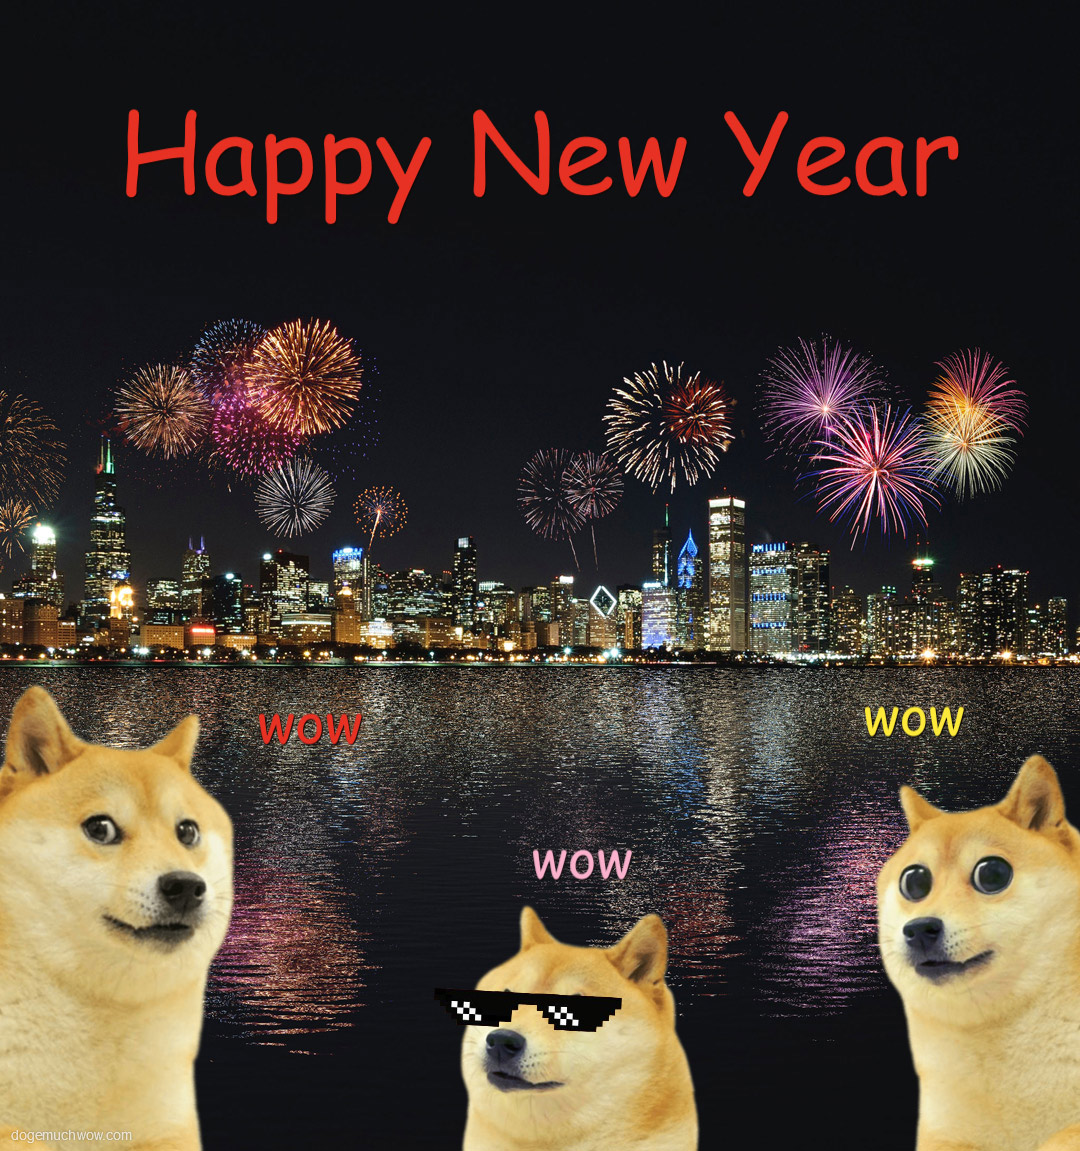 Three doges wowing at new years fireworks show. Wow.